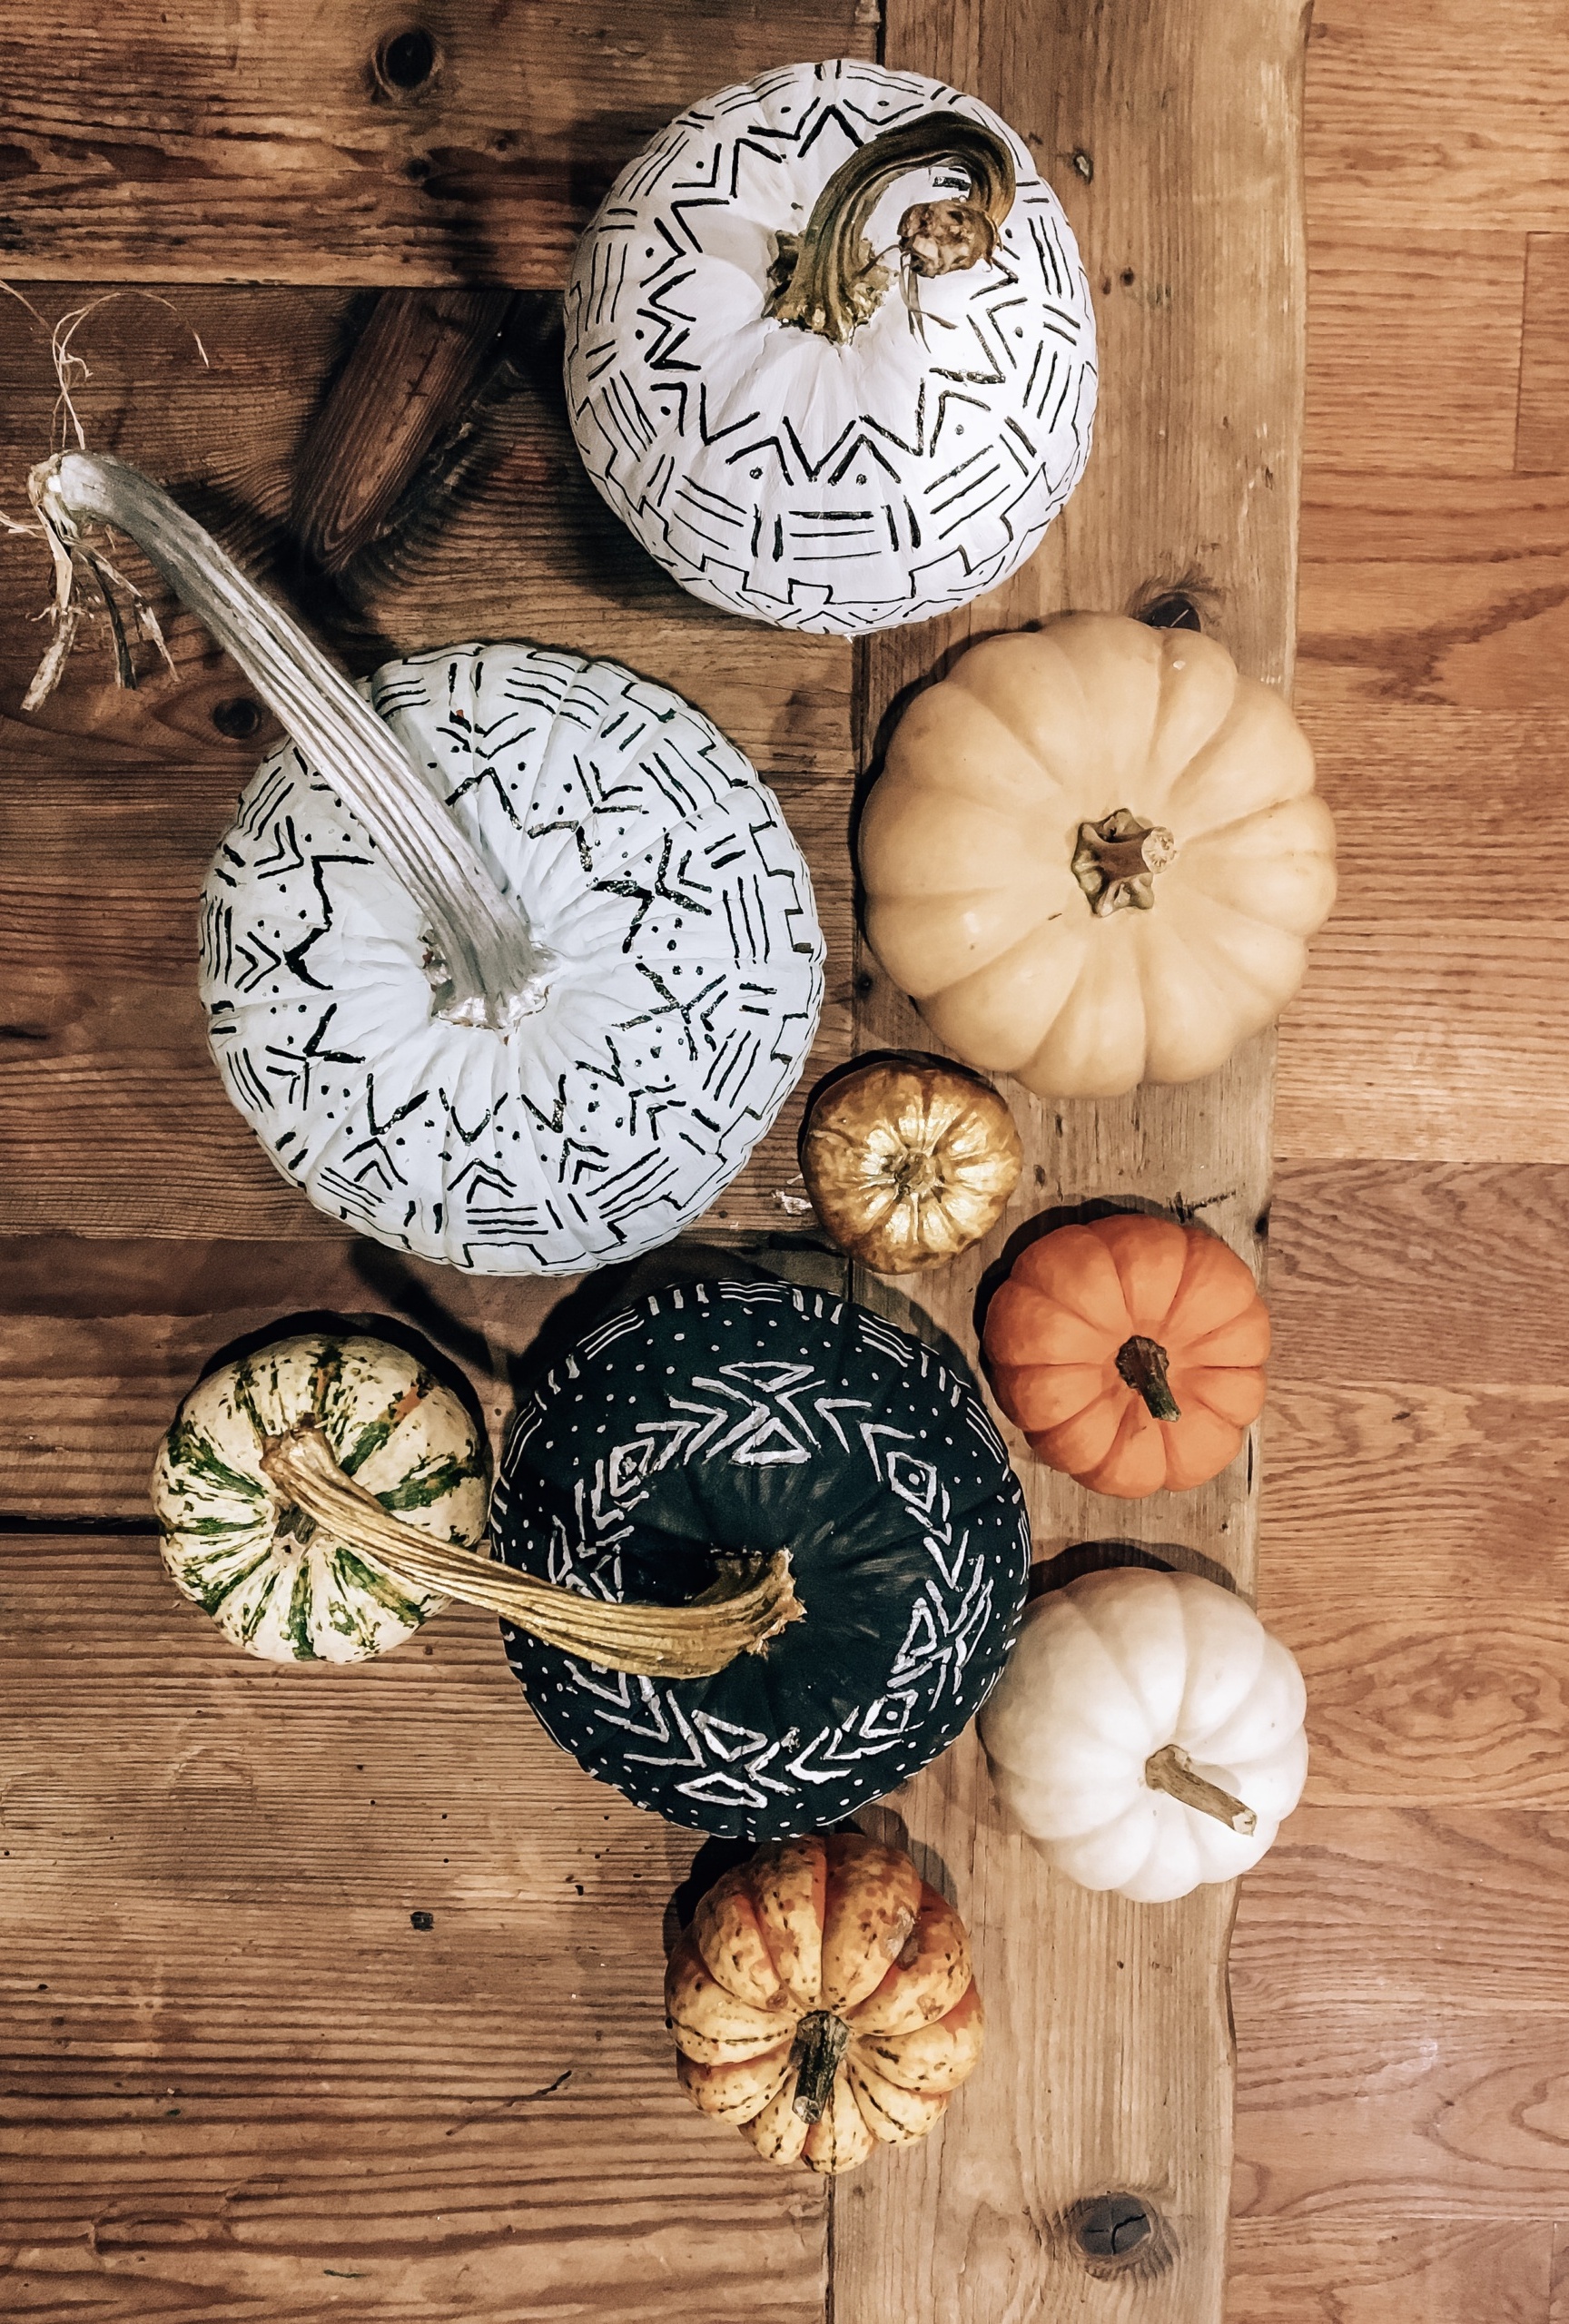  How To Throw A Spooky Last-Minute Halloween Party | Amazon Halloween Party Finds | Halloween Decor for a Last-Minute Party | Halloween Treats for a Last-Minute Halloween Party | Everything You Need to Throw A Halloween Party | Spooky Halloween Decorations | Painted Pumpkins